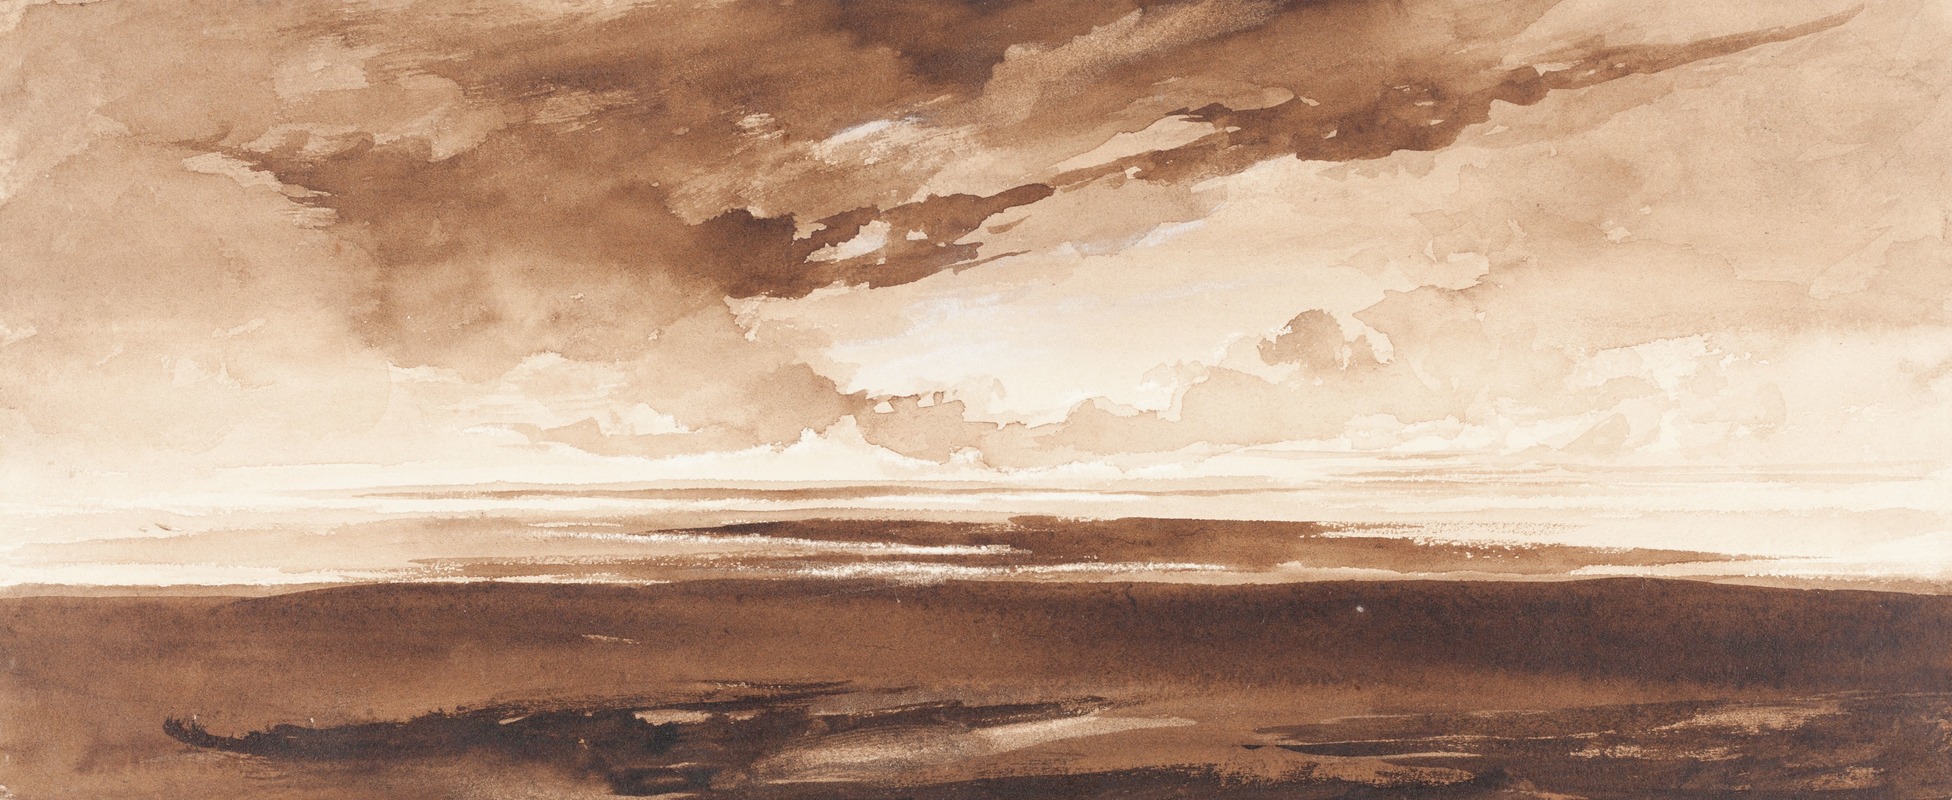 Francis Danby - Panorama of the Coast at Sunset